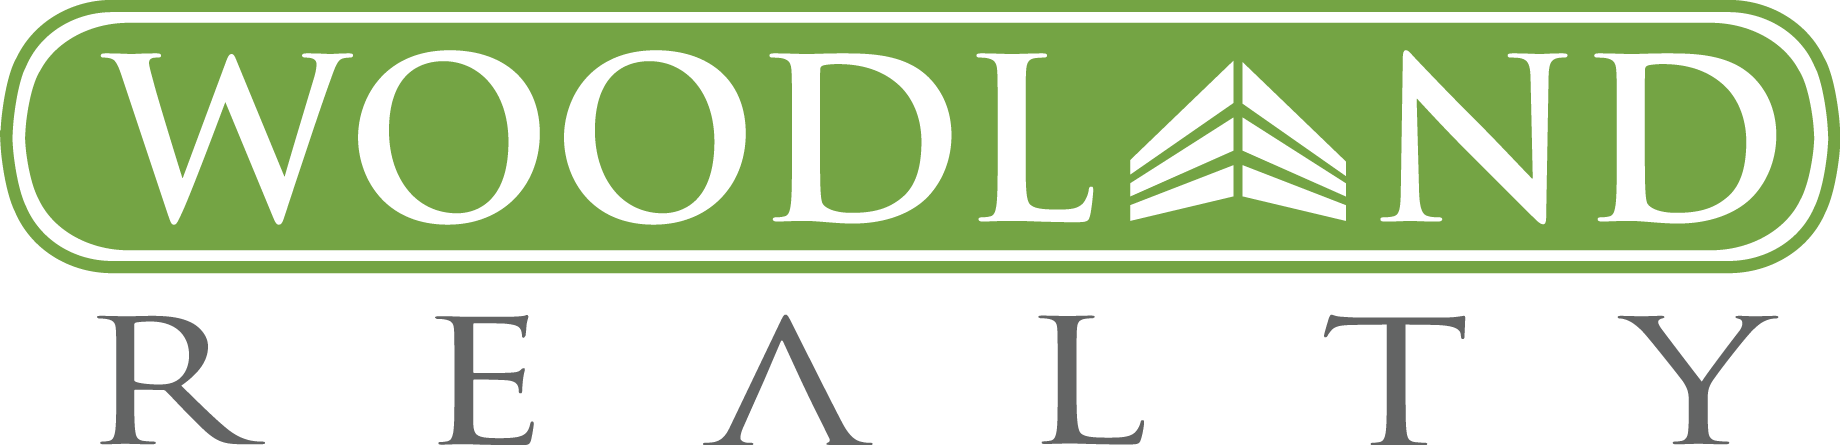 official_logo_woodland_realty.png